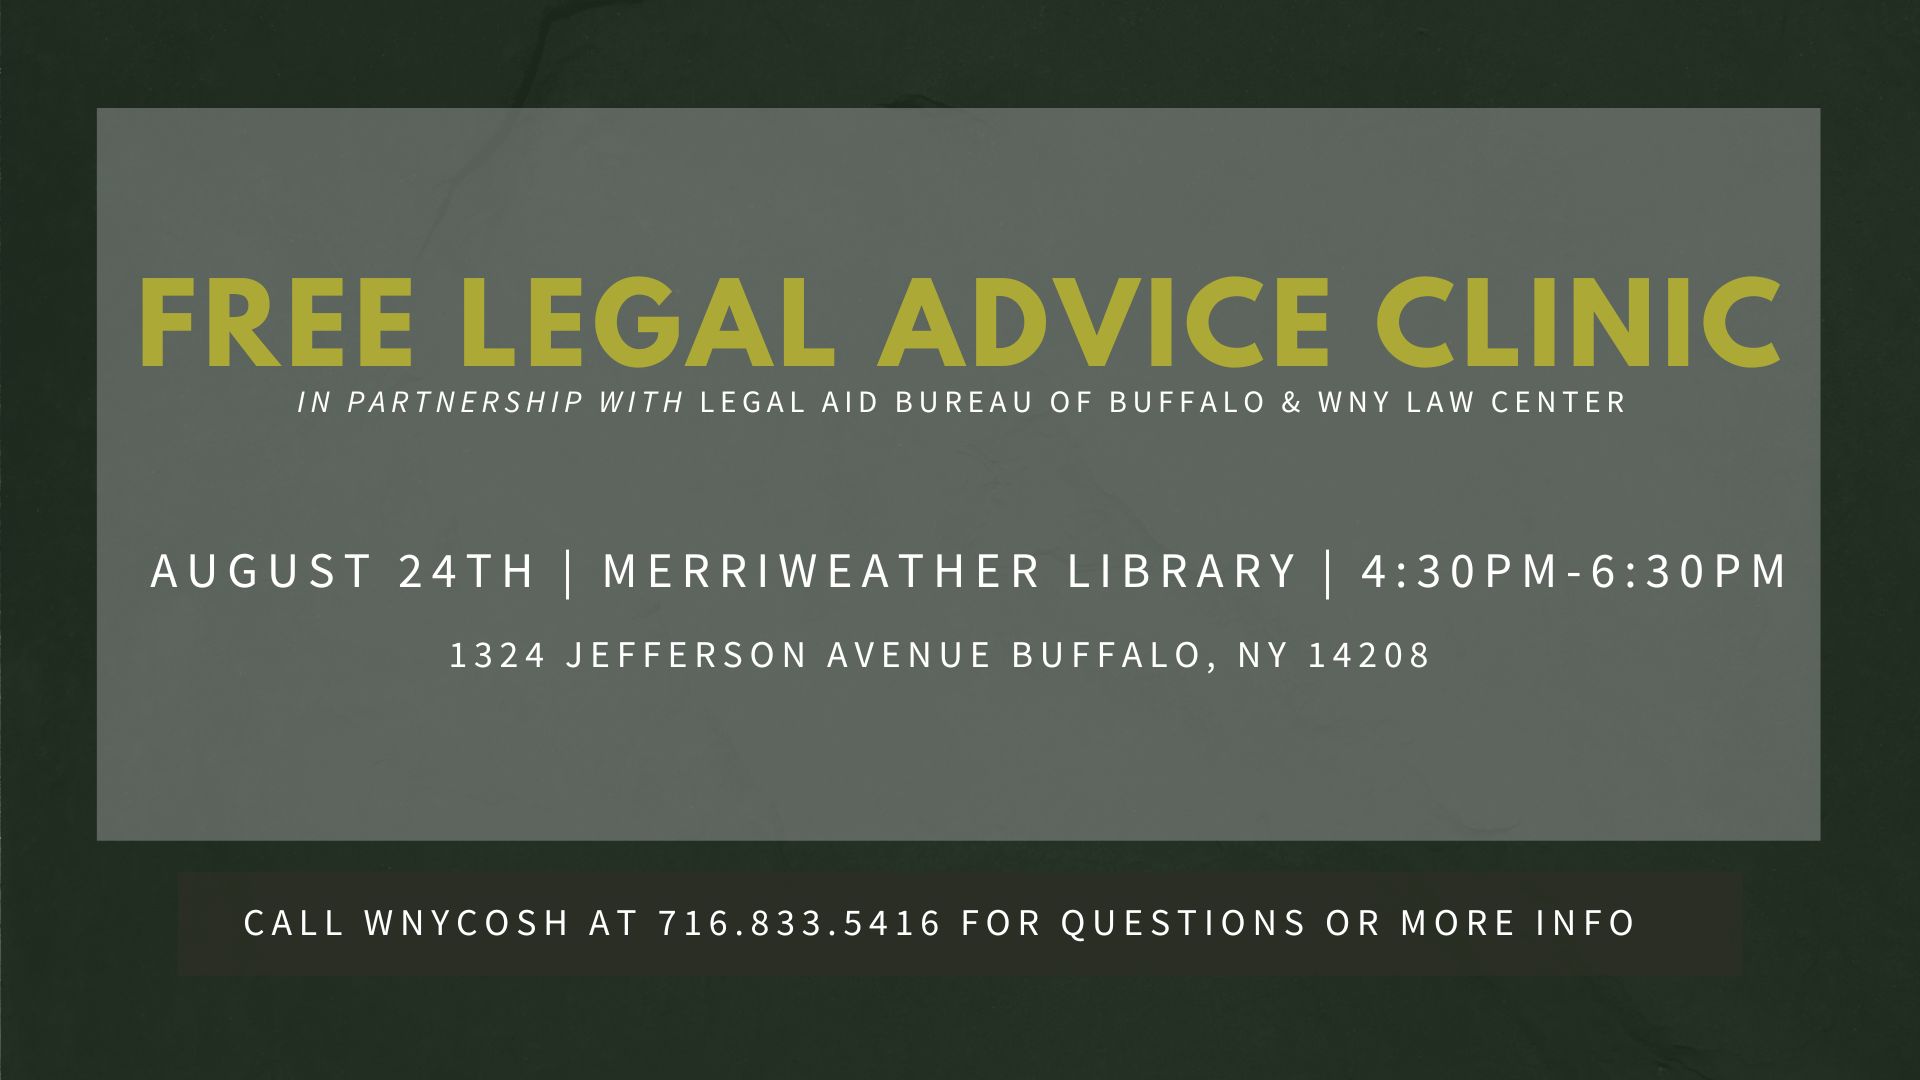 Gray flyer reading "Free Legal Advice Clinic" in partnership with Legal Aid Bureau of Buffalo and Western New York Law Center with the time, date, and location of the clinic.